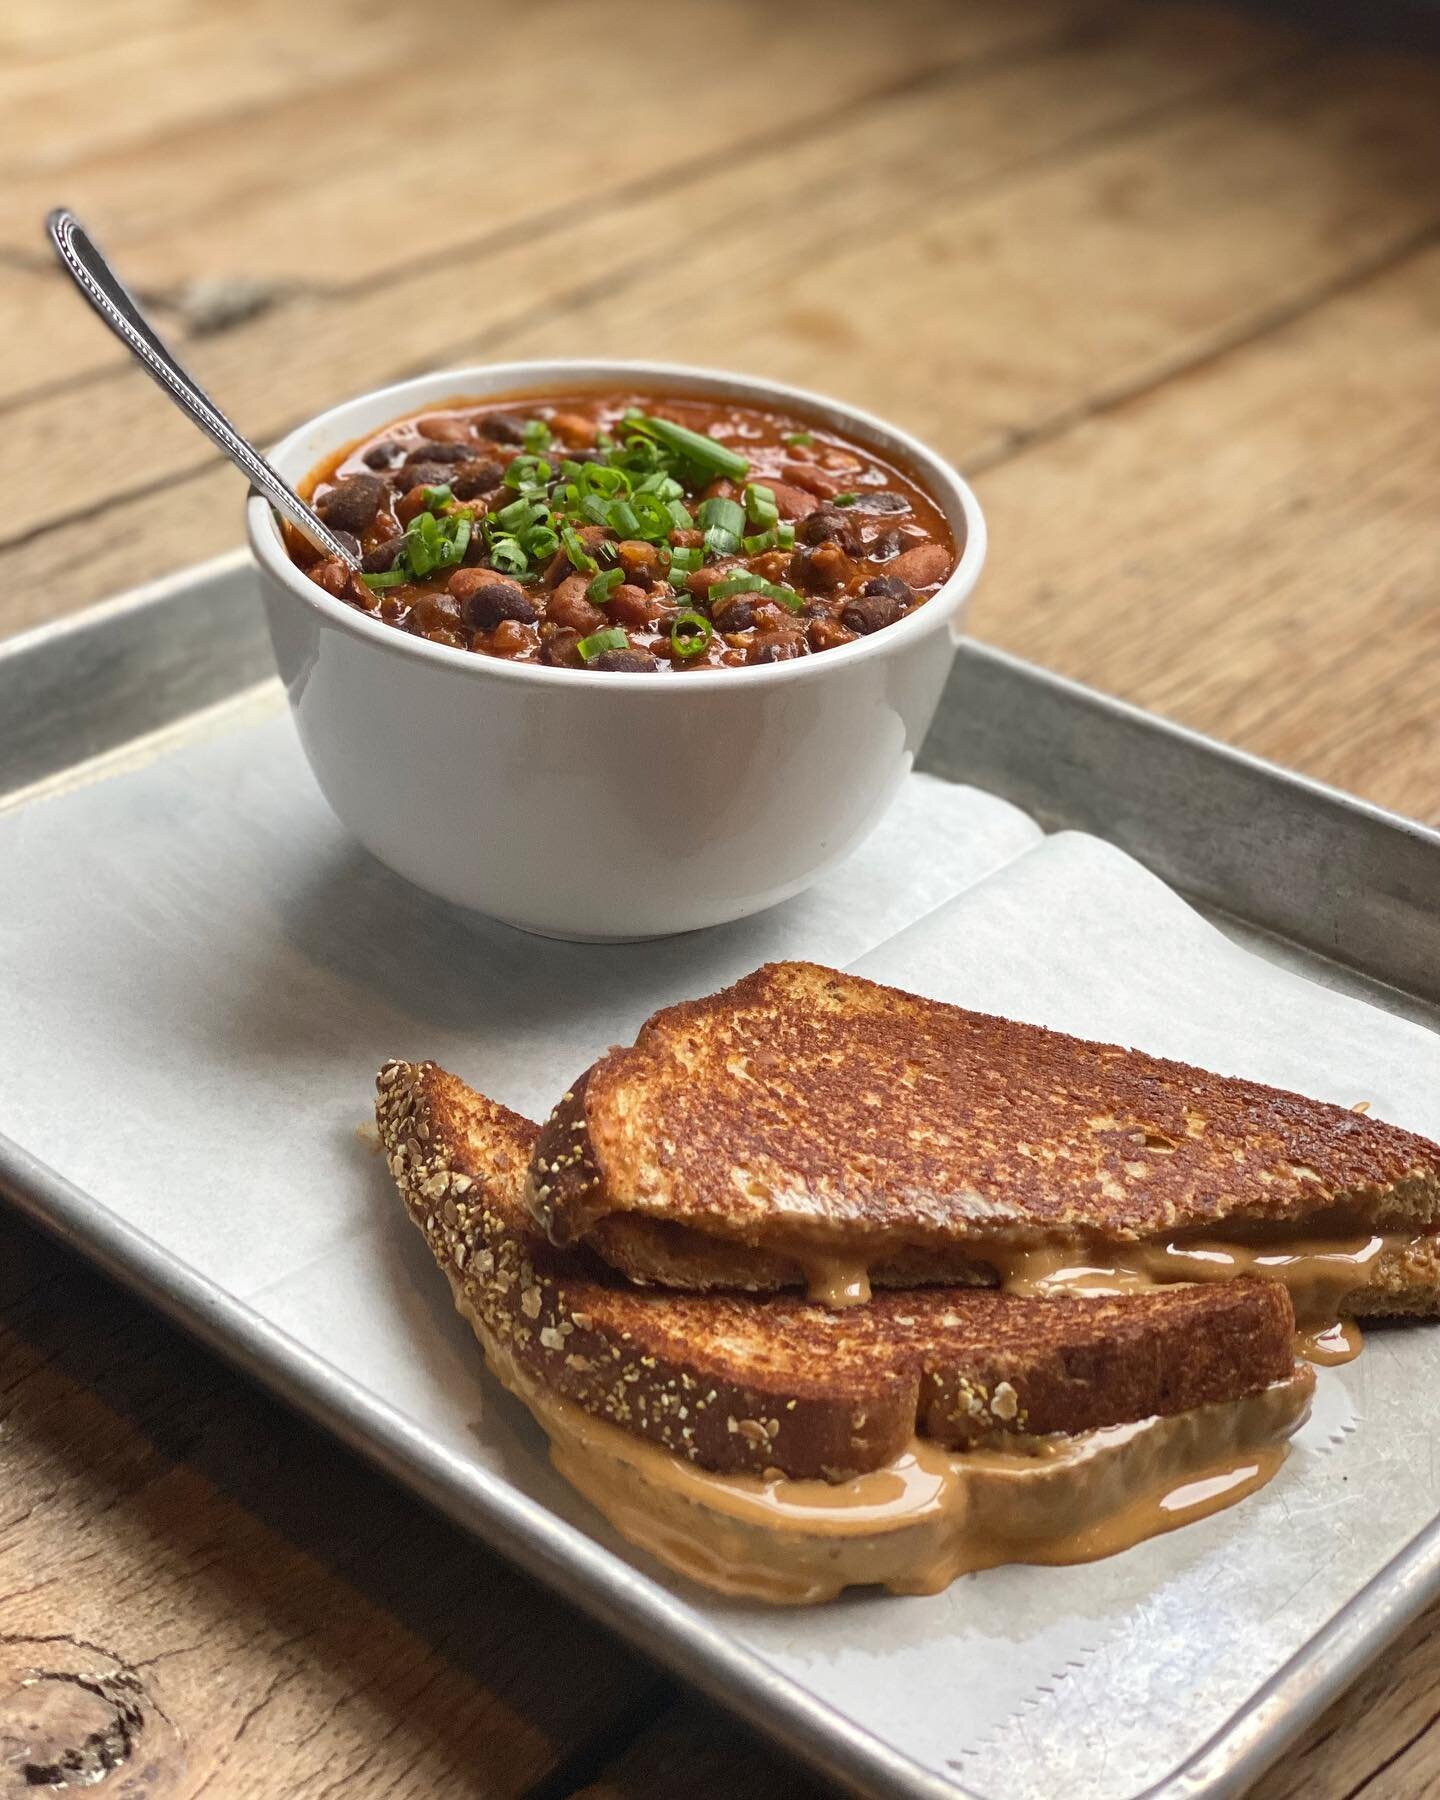 This rainy day calls for chili!  We&rsquo;ve got Coops famous chili every day, but today we&rsquo;ve got a vegan bean and tofu chili served with a pb&amp;j :)